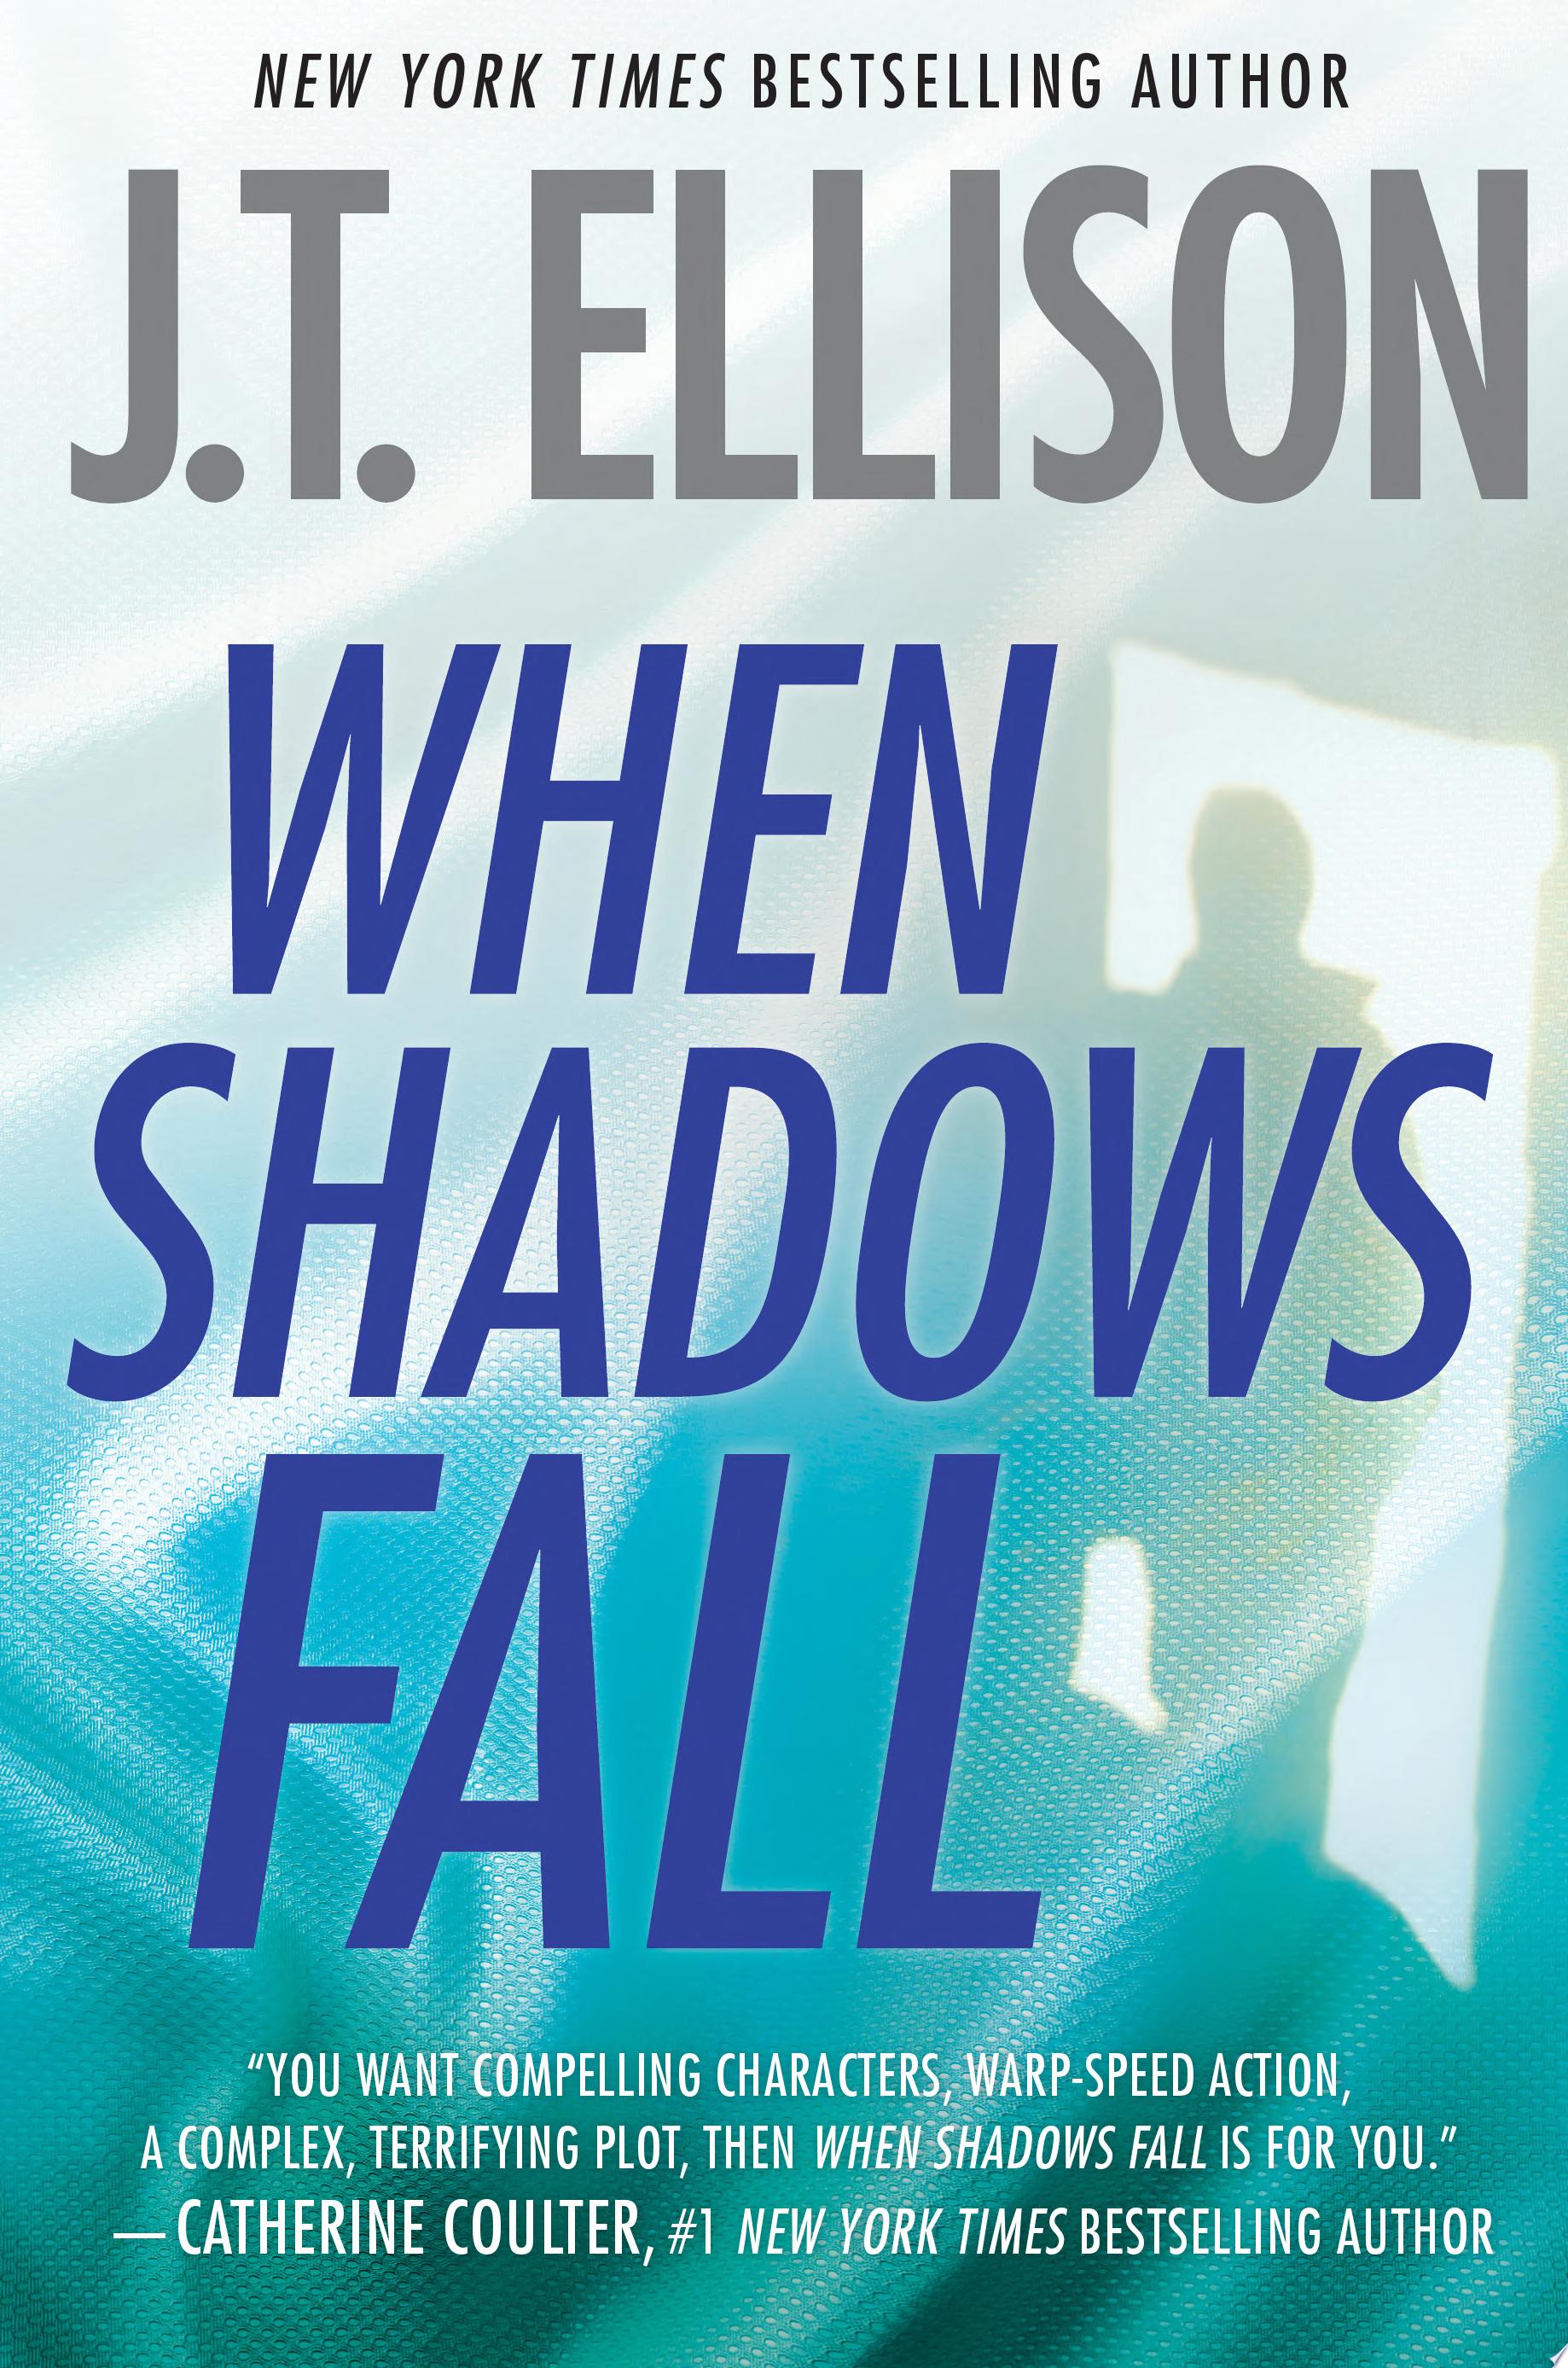 Image for "When Shadows Fall"